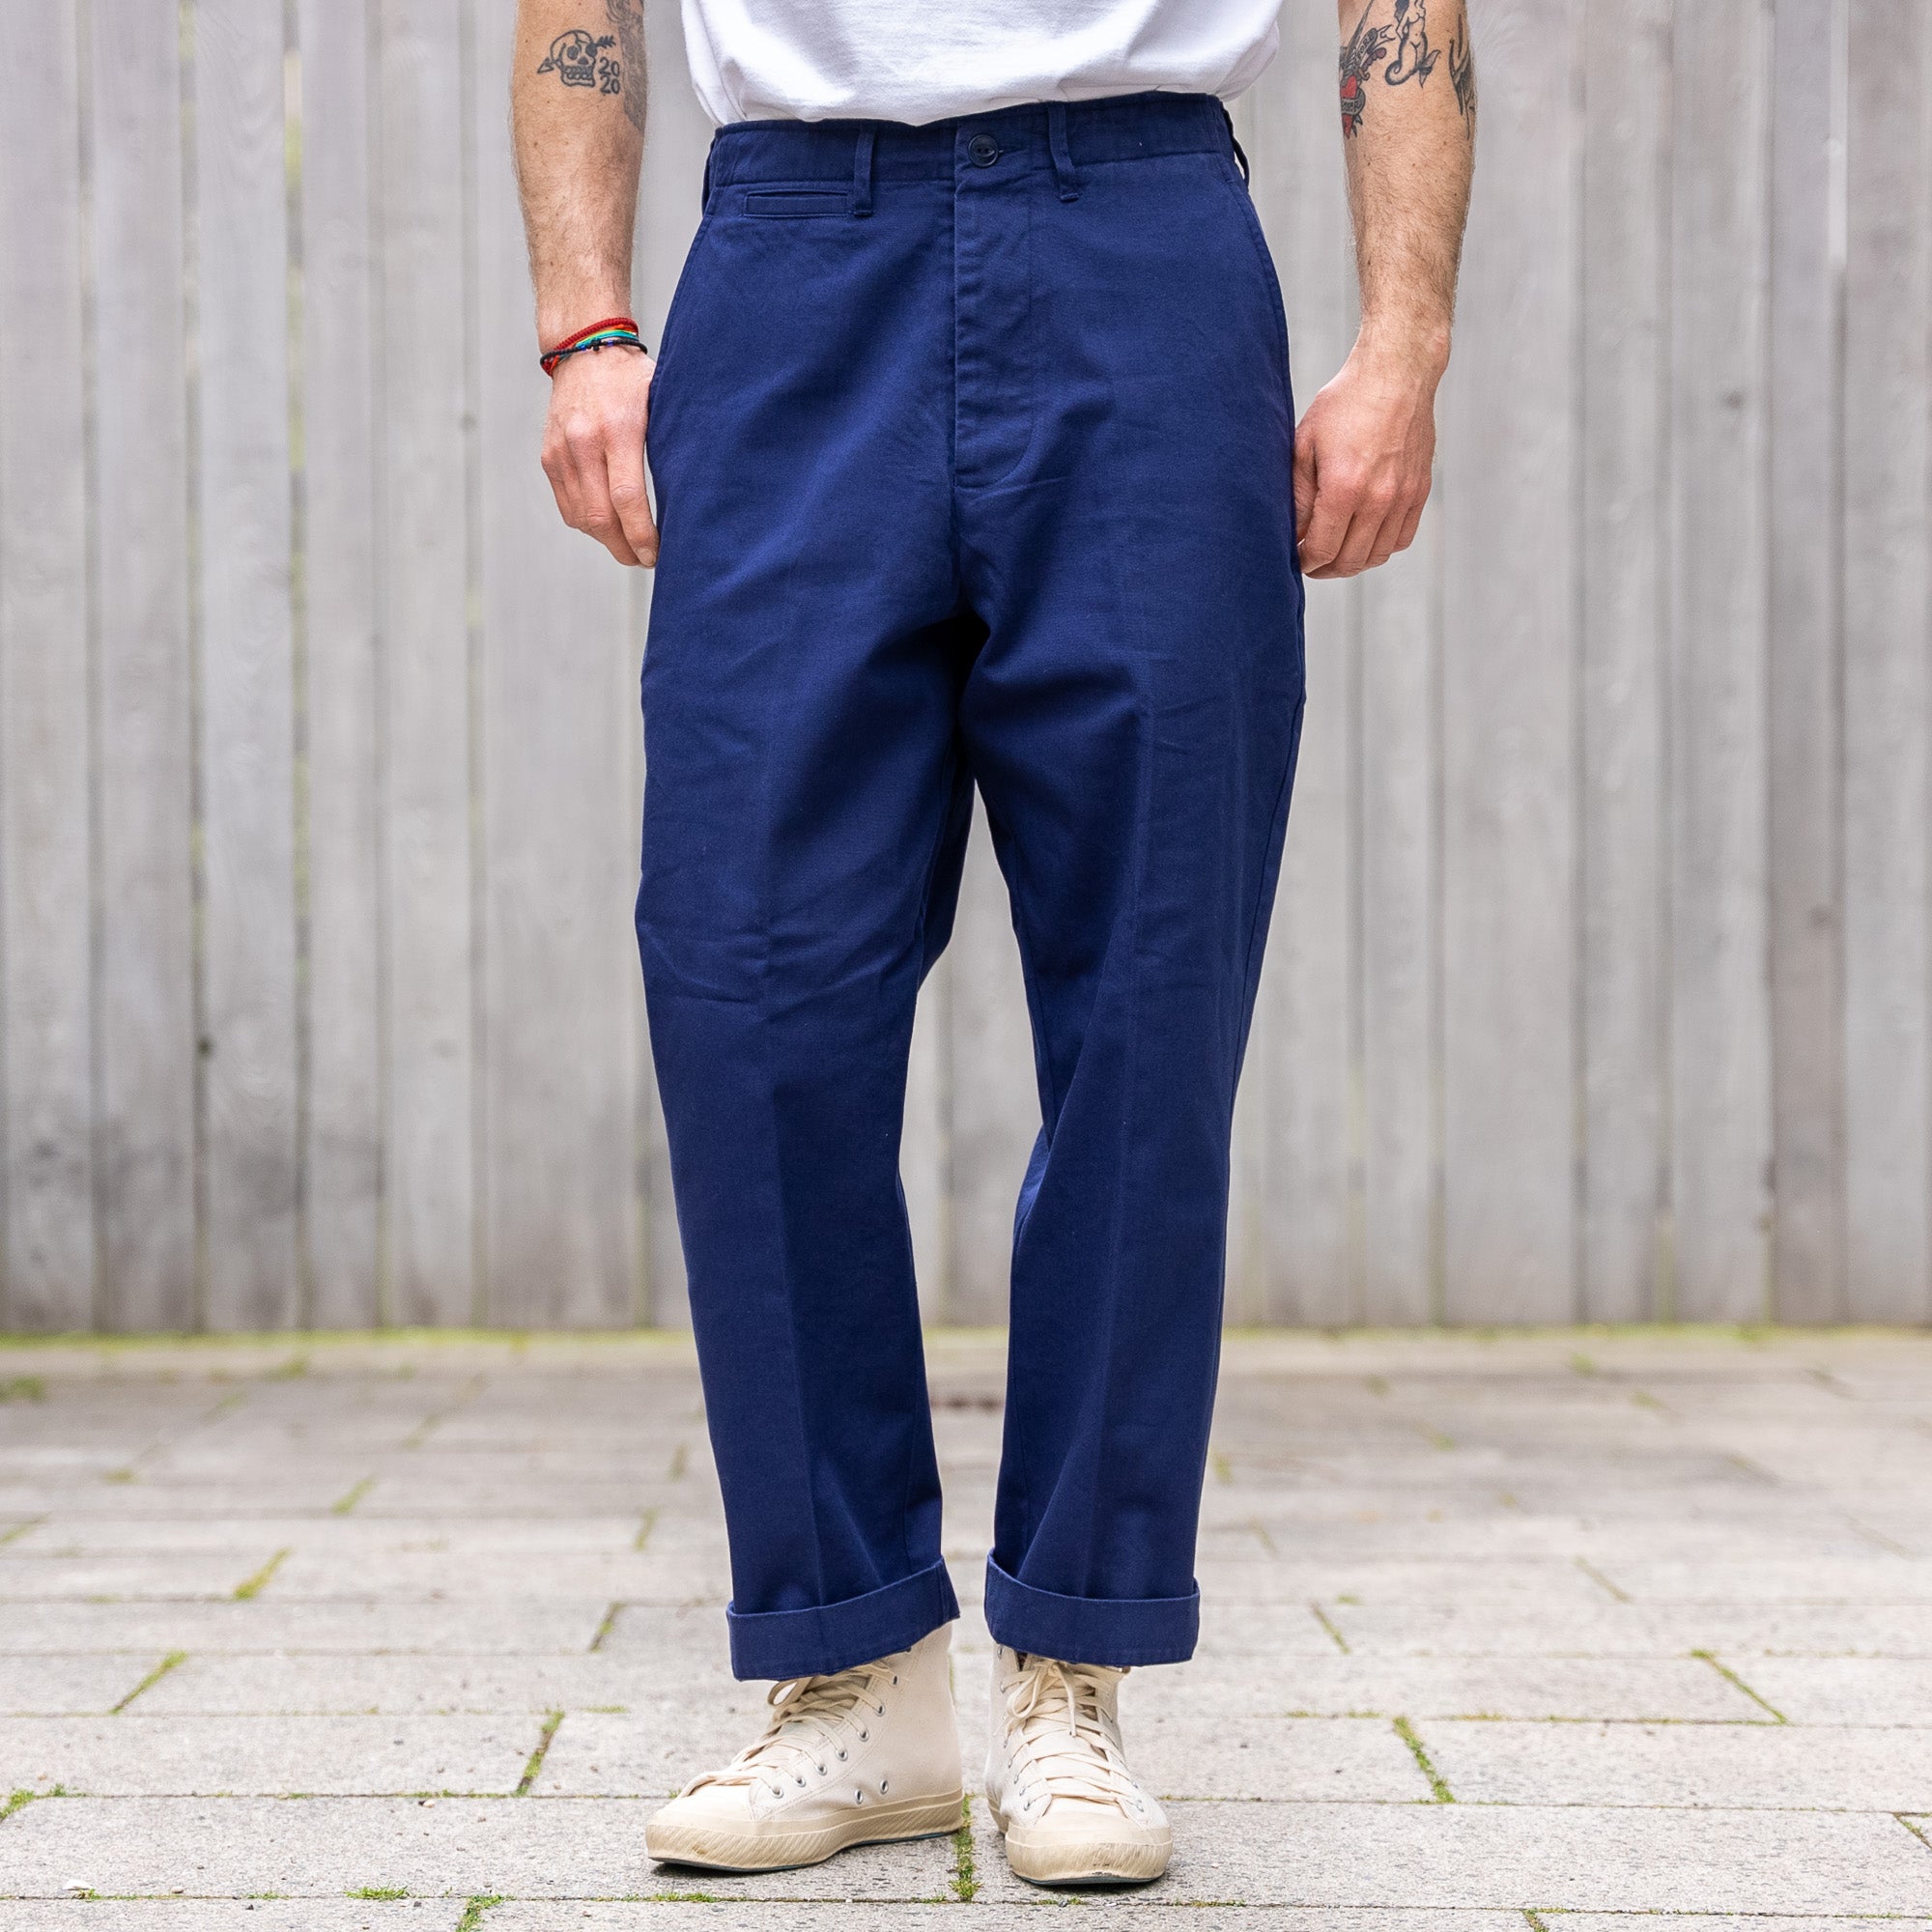 Merz b Schwanen Twill Pleat Chino – Ink Blue / Relaxed Tapered